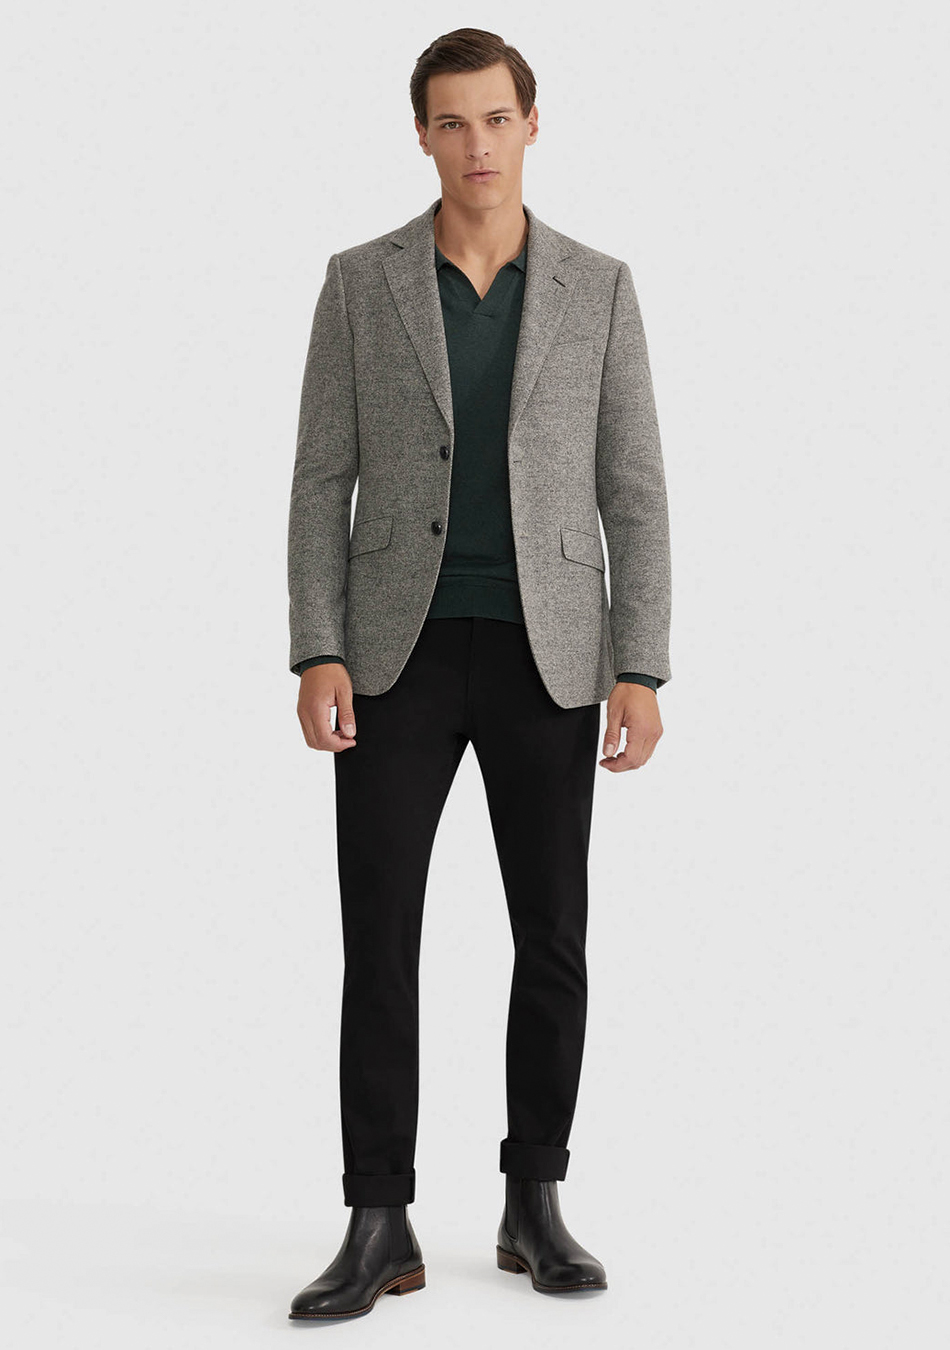 Grey blazer, green polo T-shirt, black jeans, and black Chelsea boots